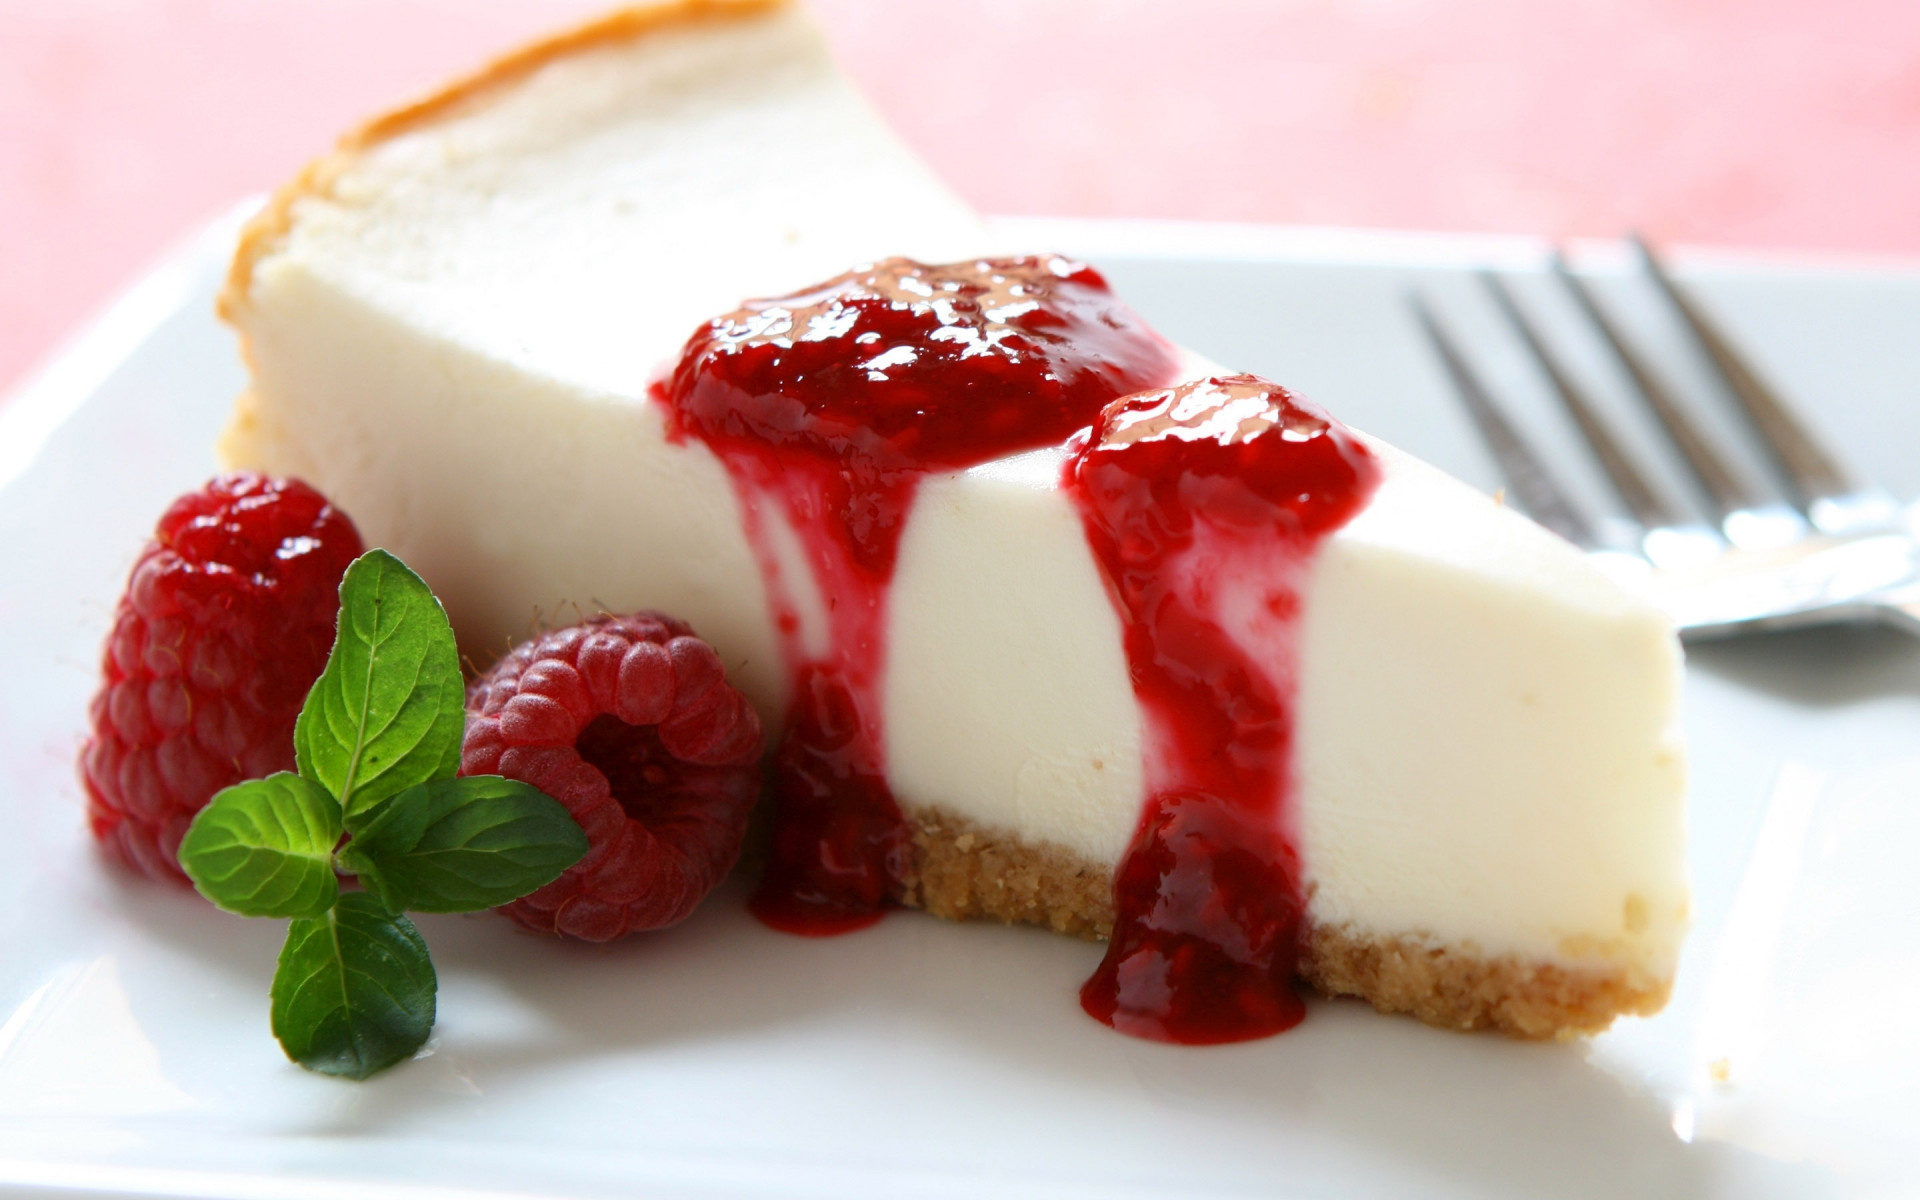 Cheesecake: Comes in a wide variety of flavors, Food. 1920x1200 HD Background.